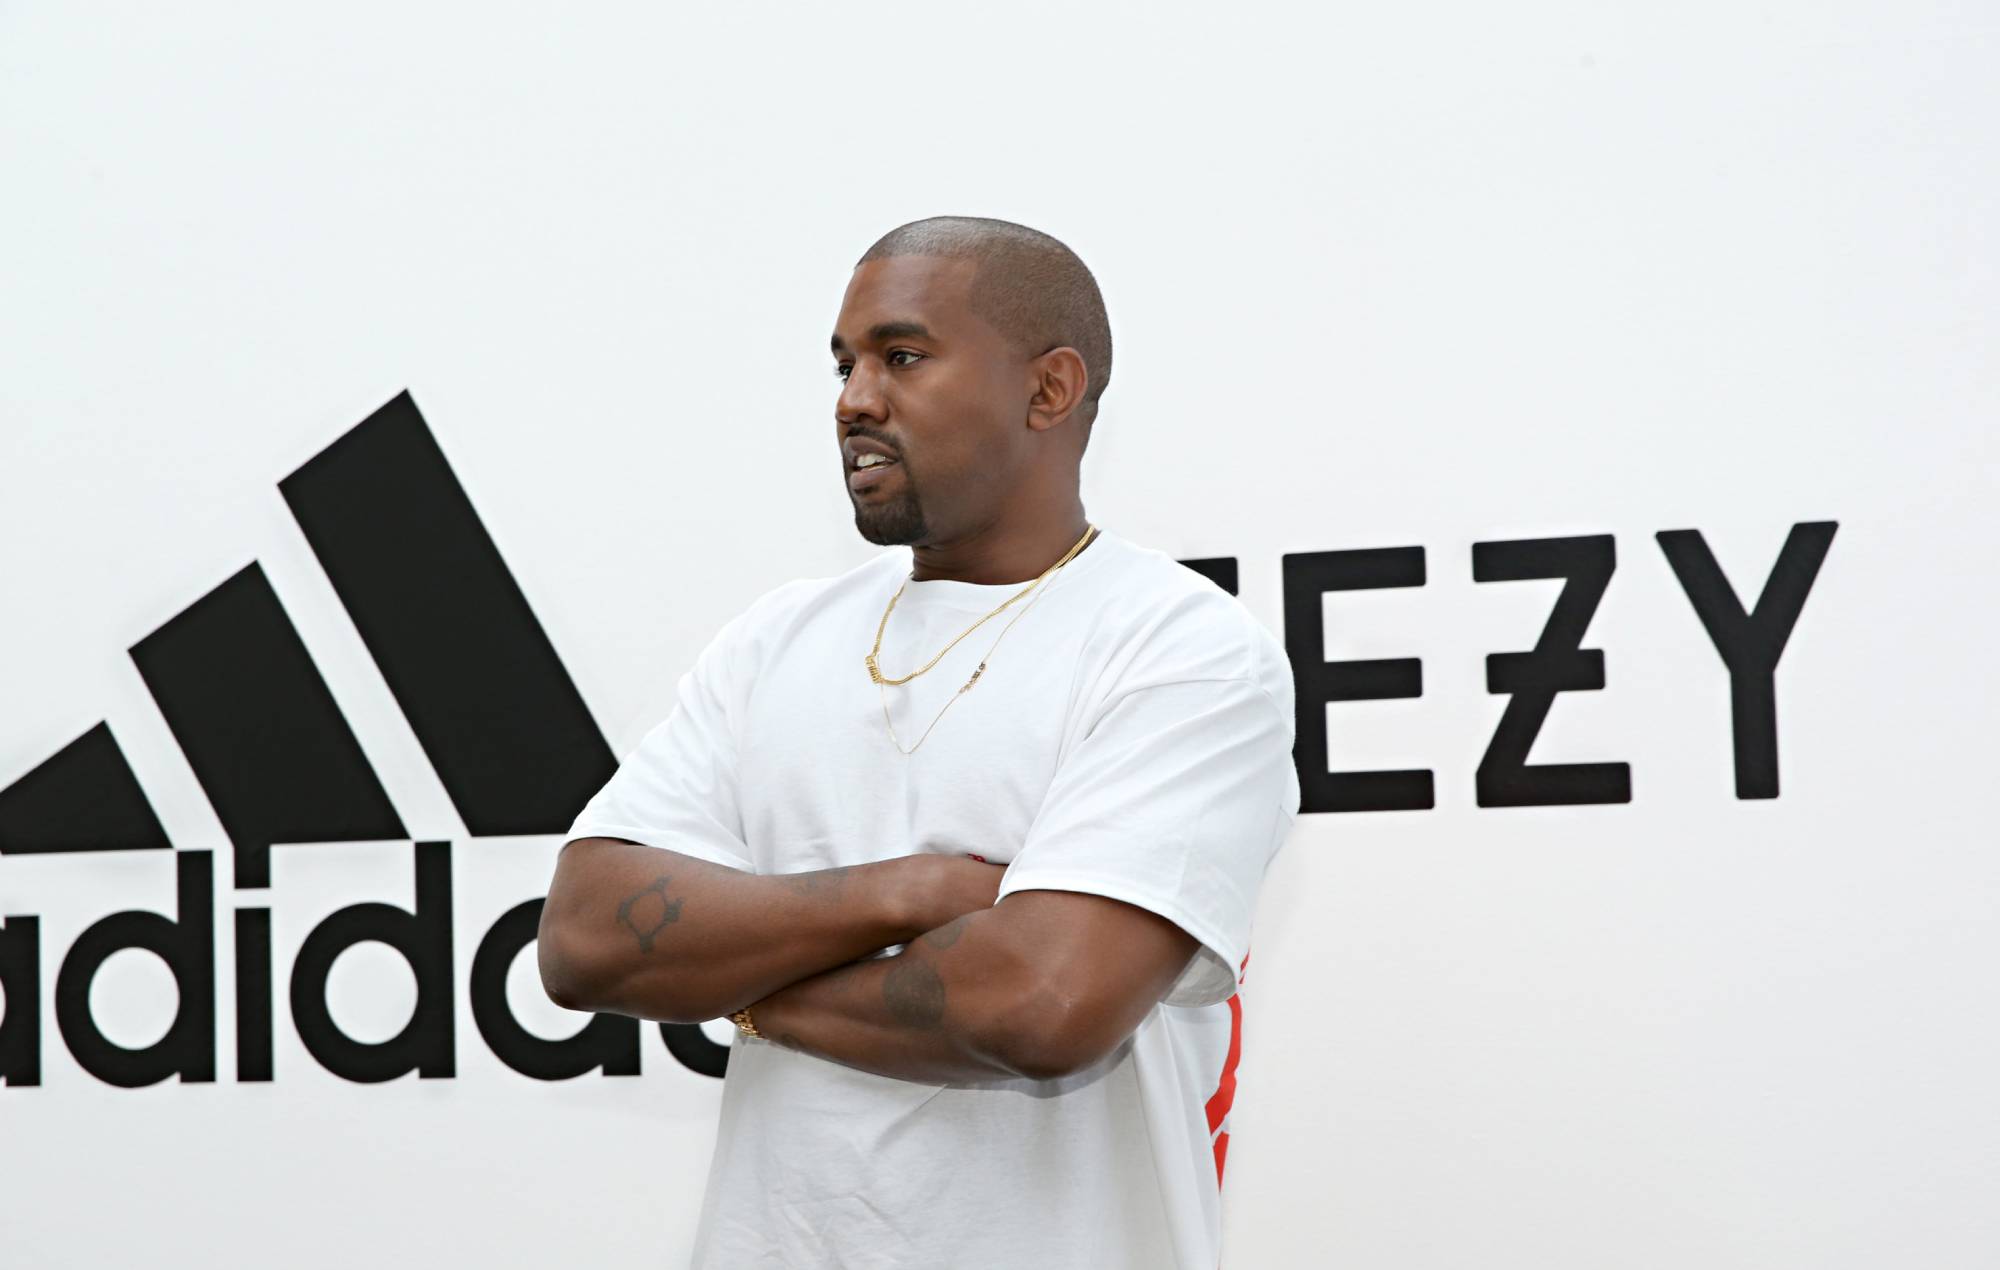 Adidas warns of big profit losses after the end of its collaboration with Kanye West Yeezy